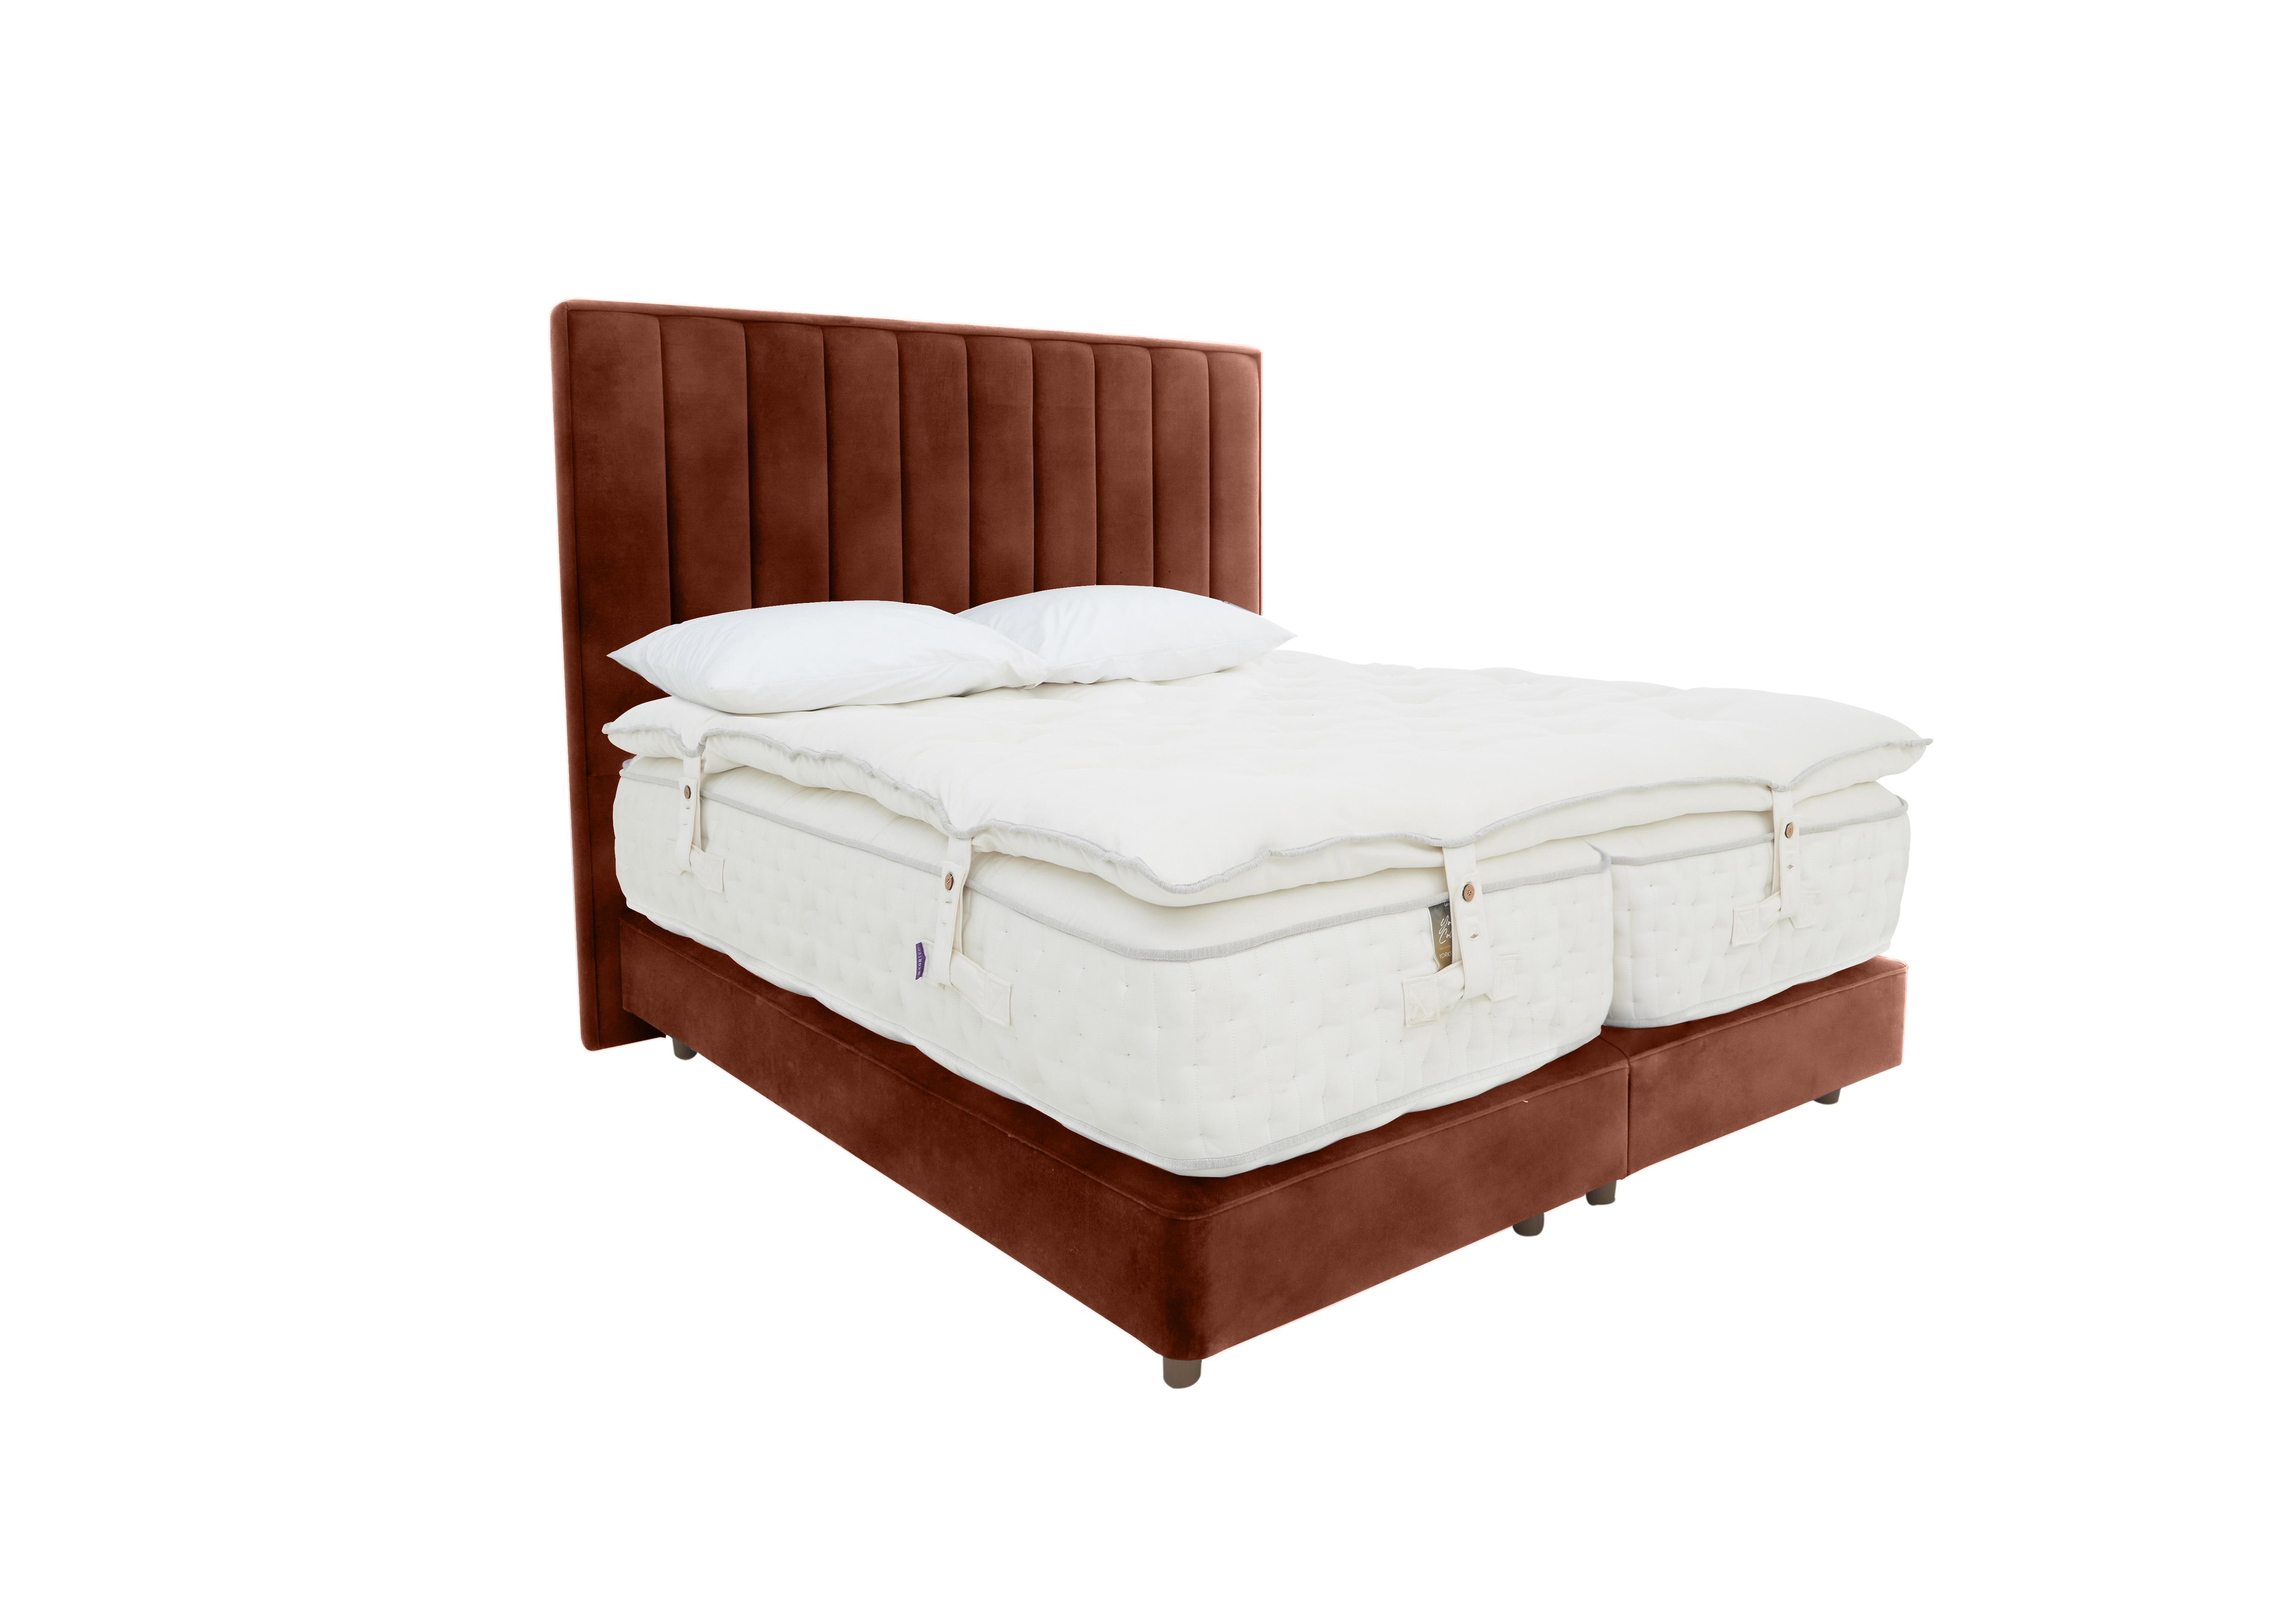 Yorkshire 40K Shallow Divan Set with Zip and Link Mattress with Mattress Topper in Lovely Umber on Furniture Village